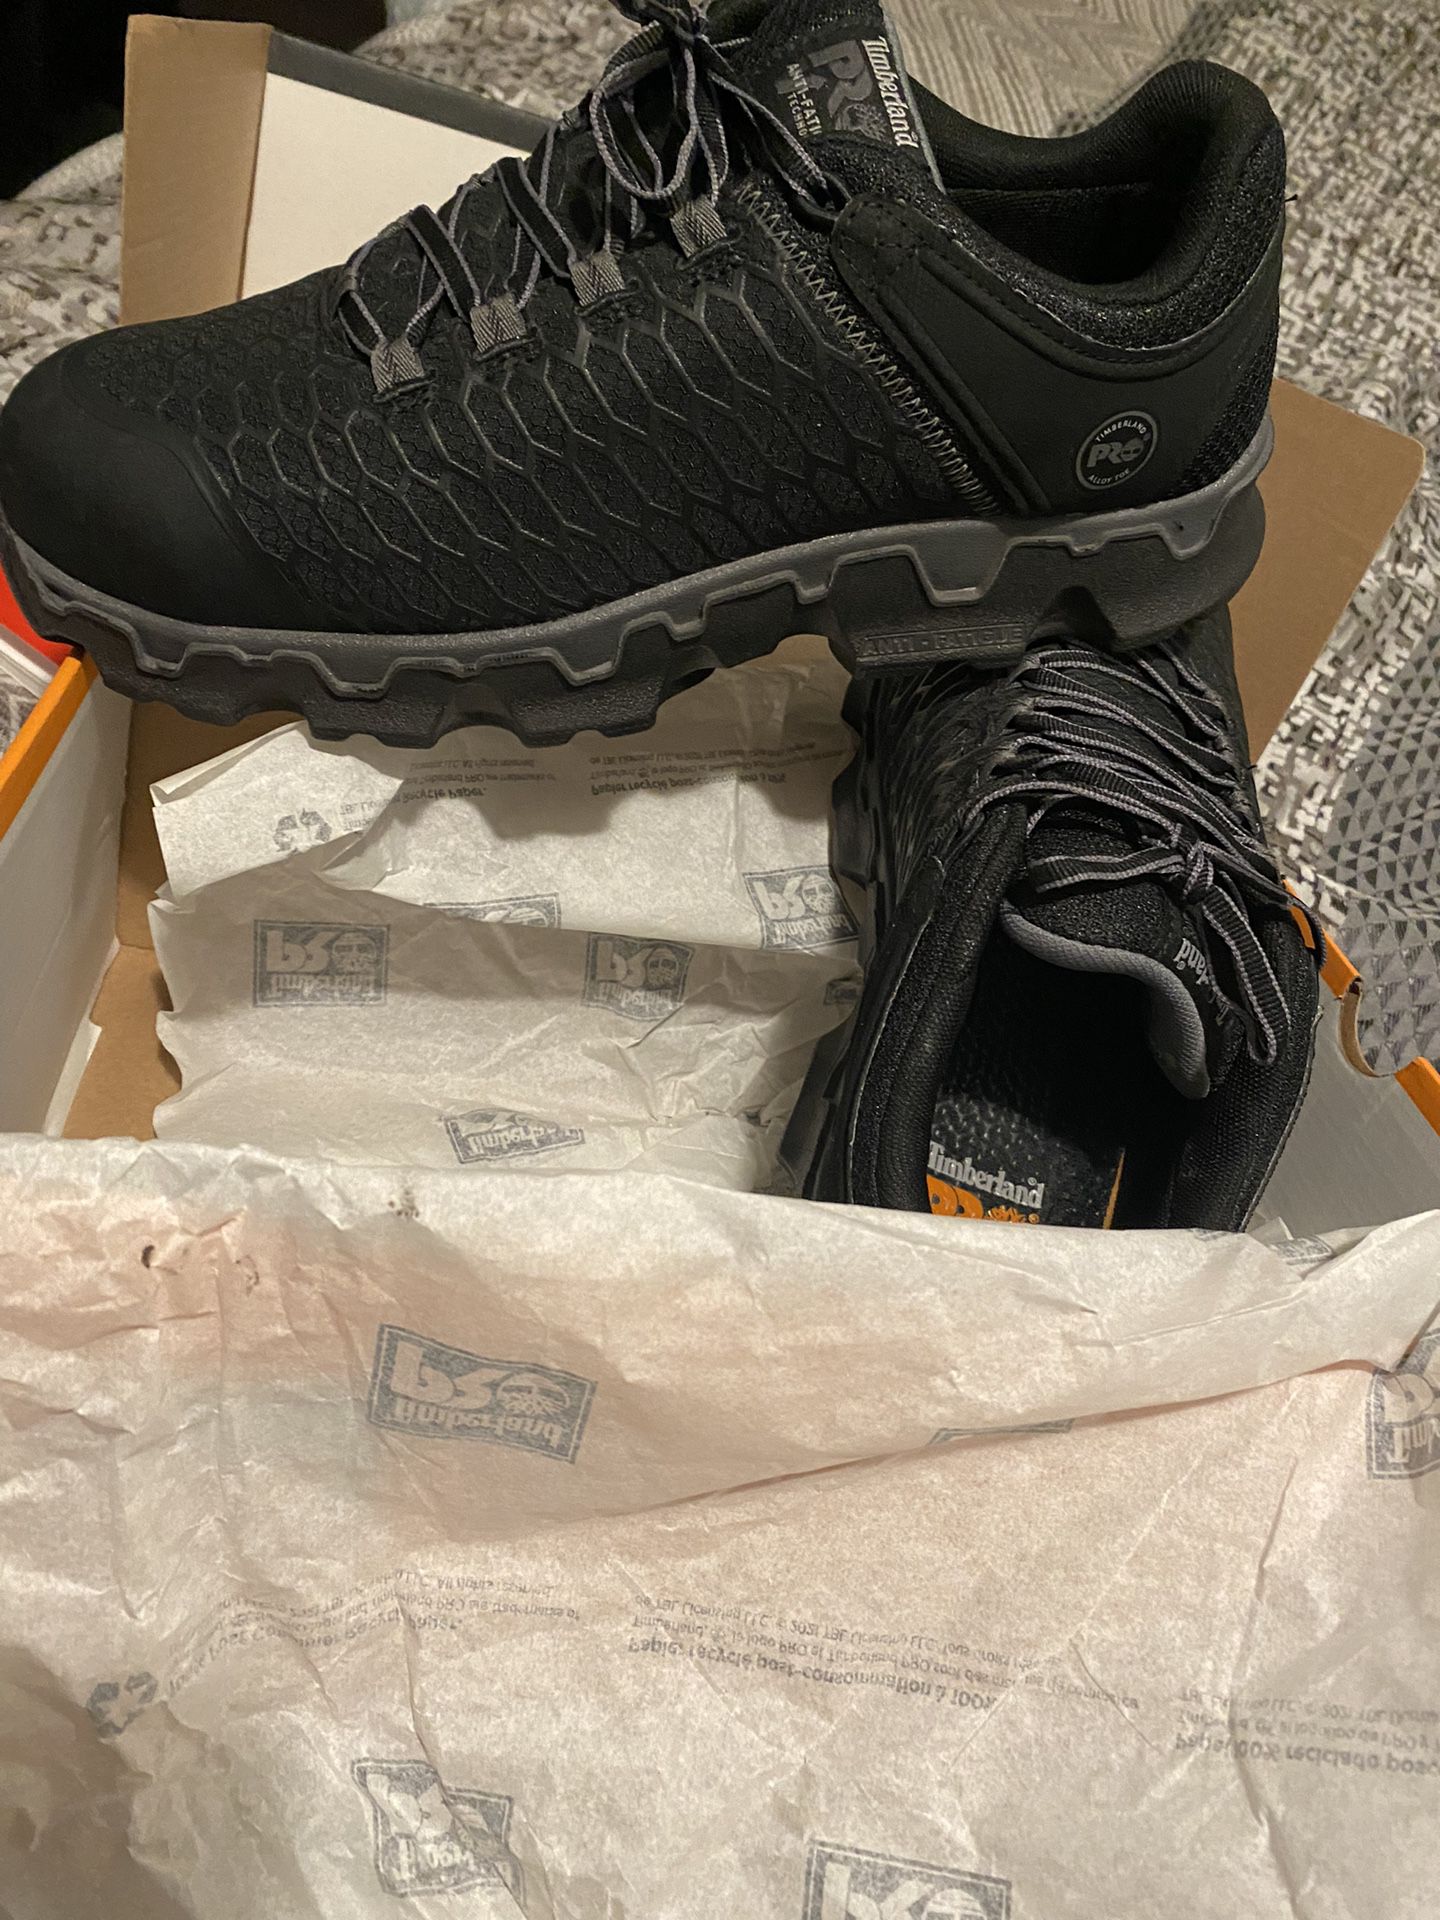 Timberland Pro Work Shoes